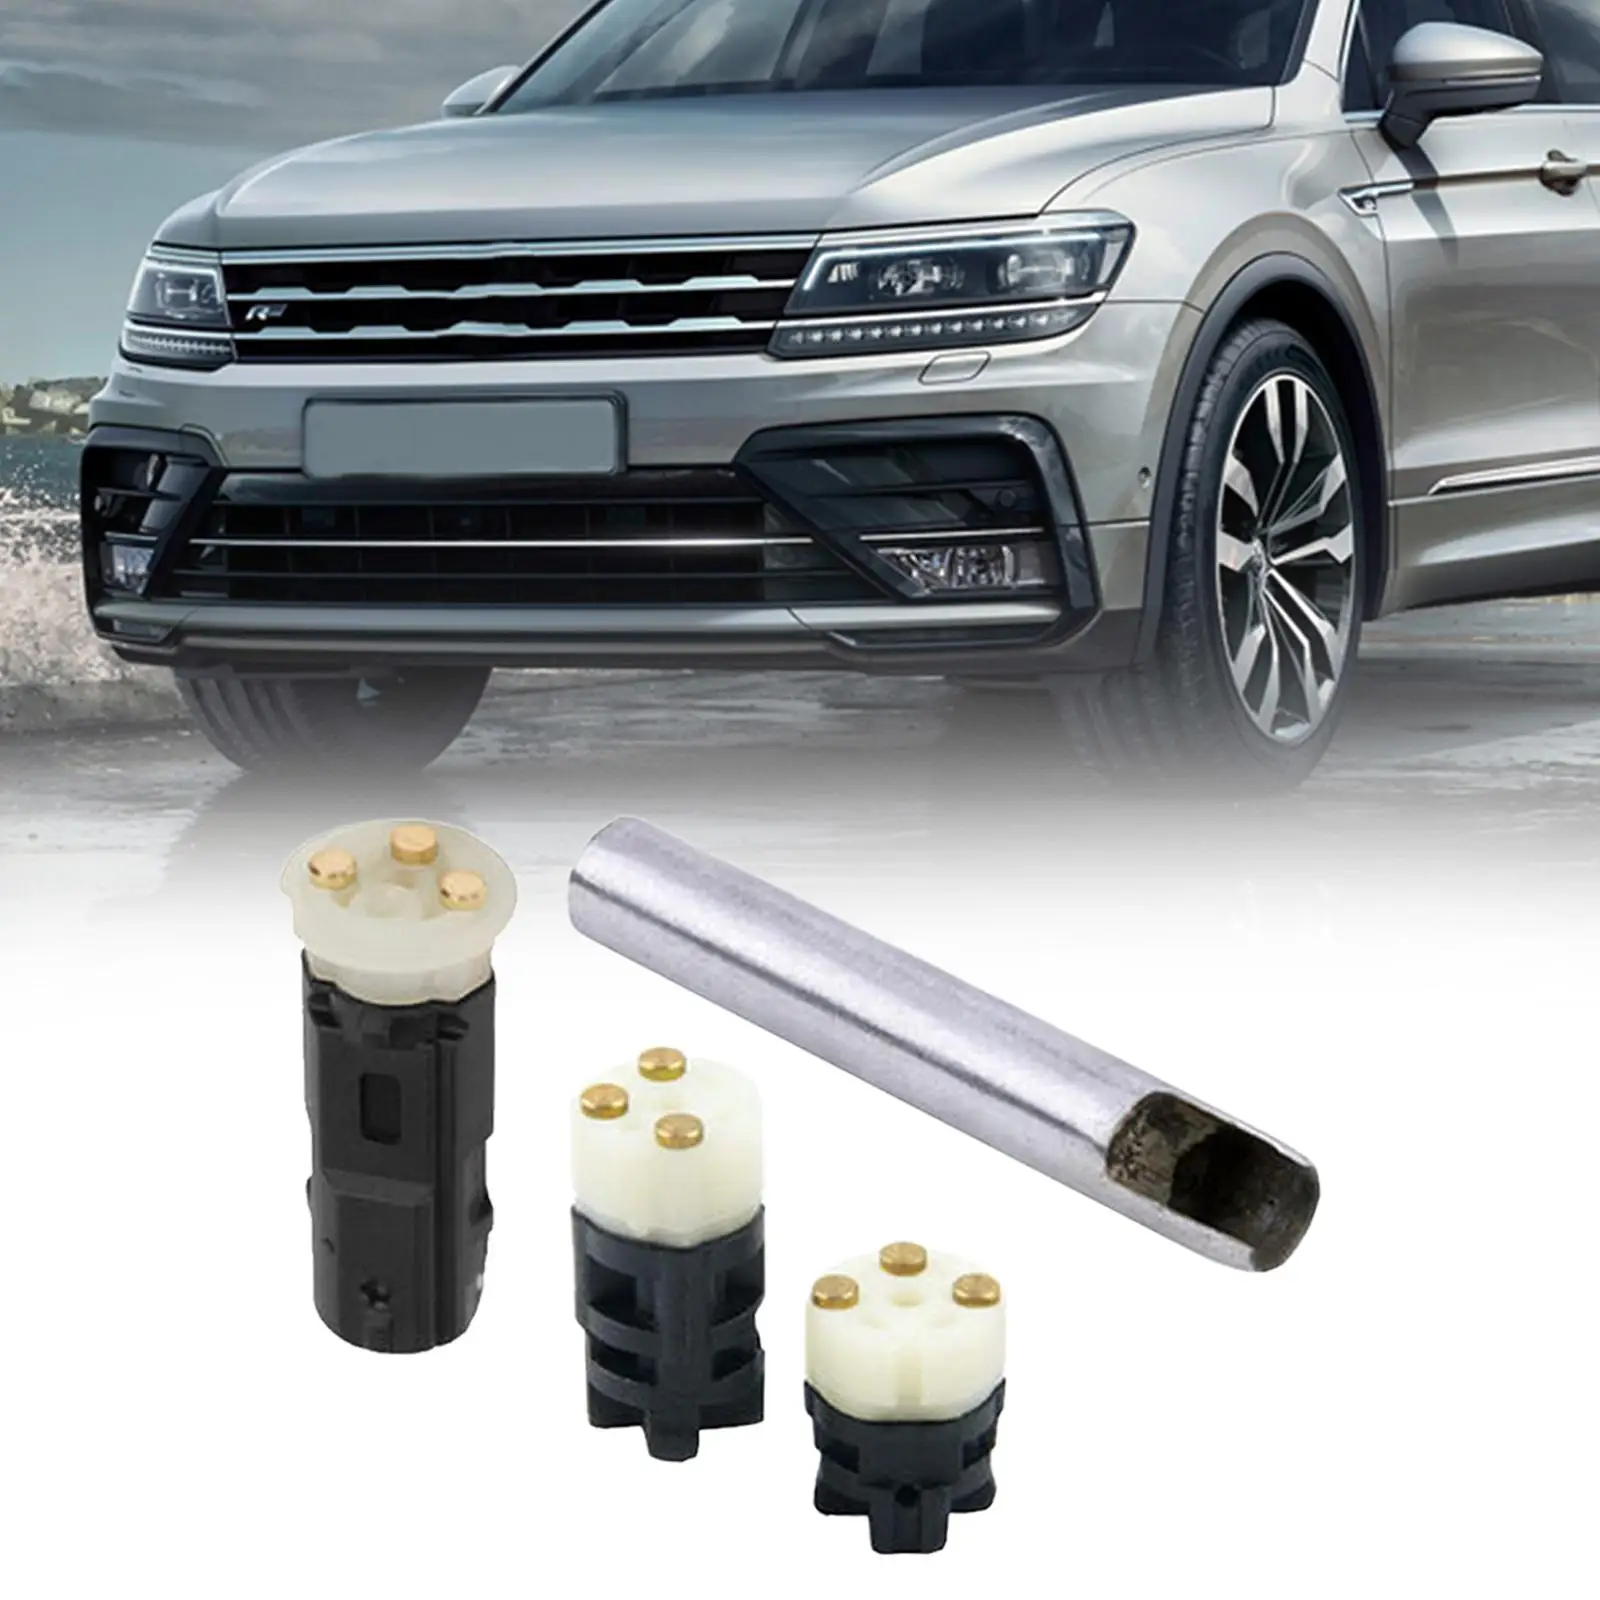 Control Module Sensor Direct Replace Easy Installation Quality Professional Auto Accessories for 7G E Class G Wagon CL Clc